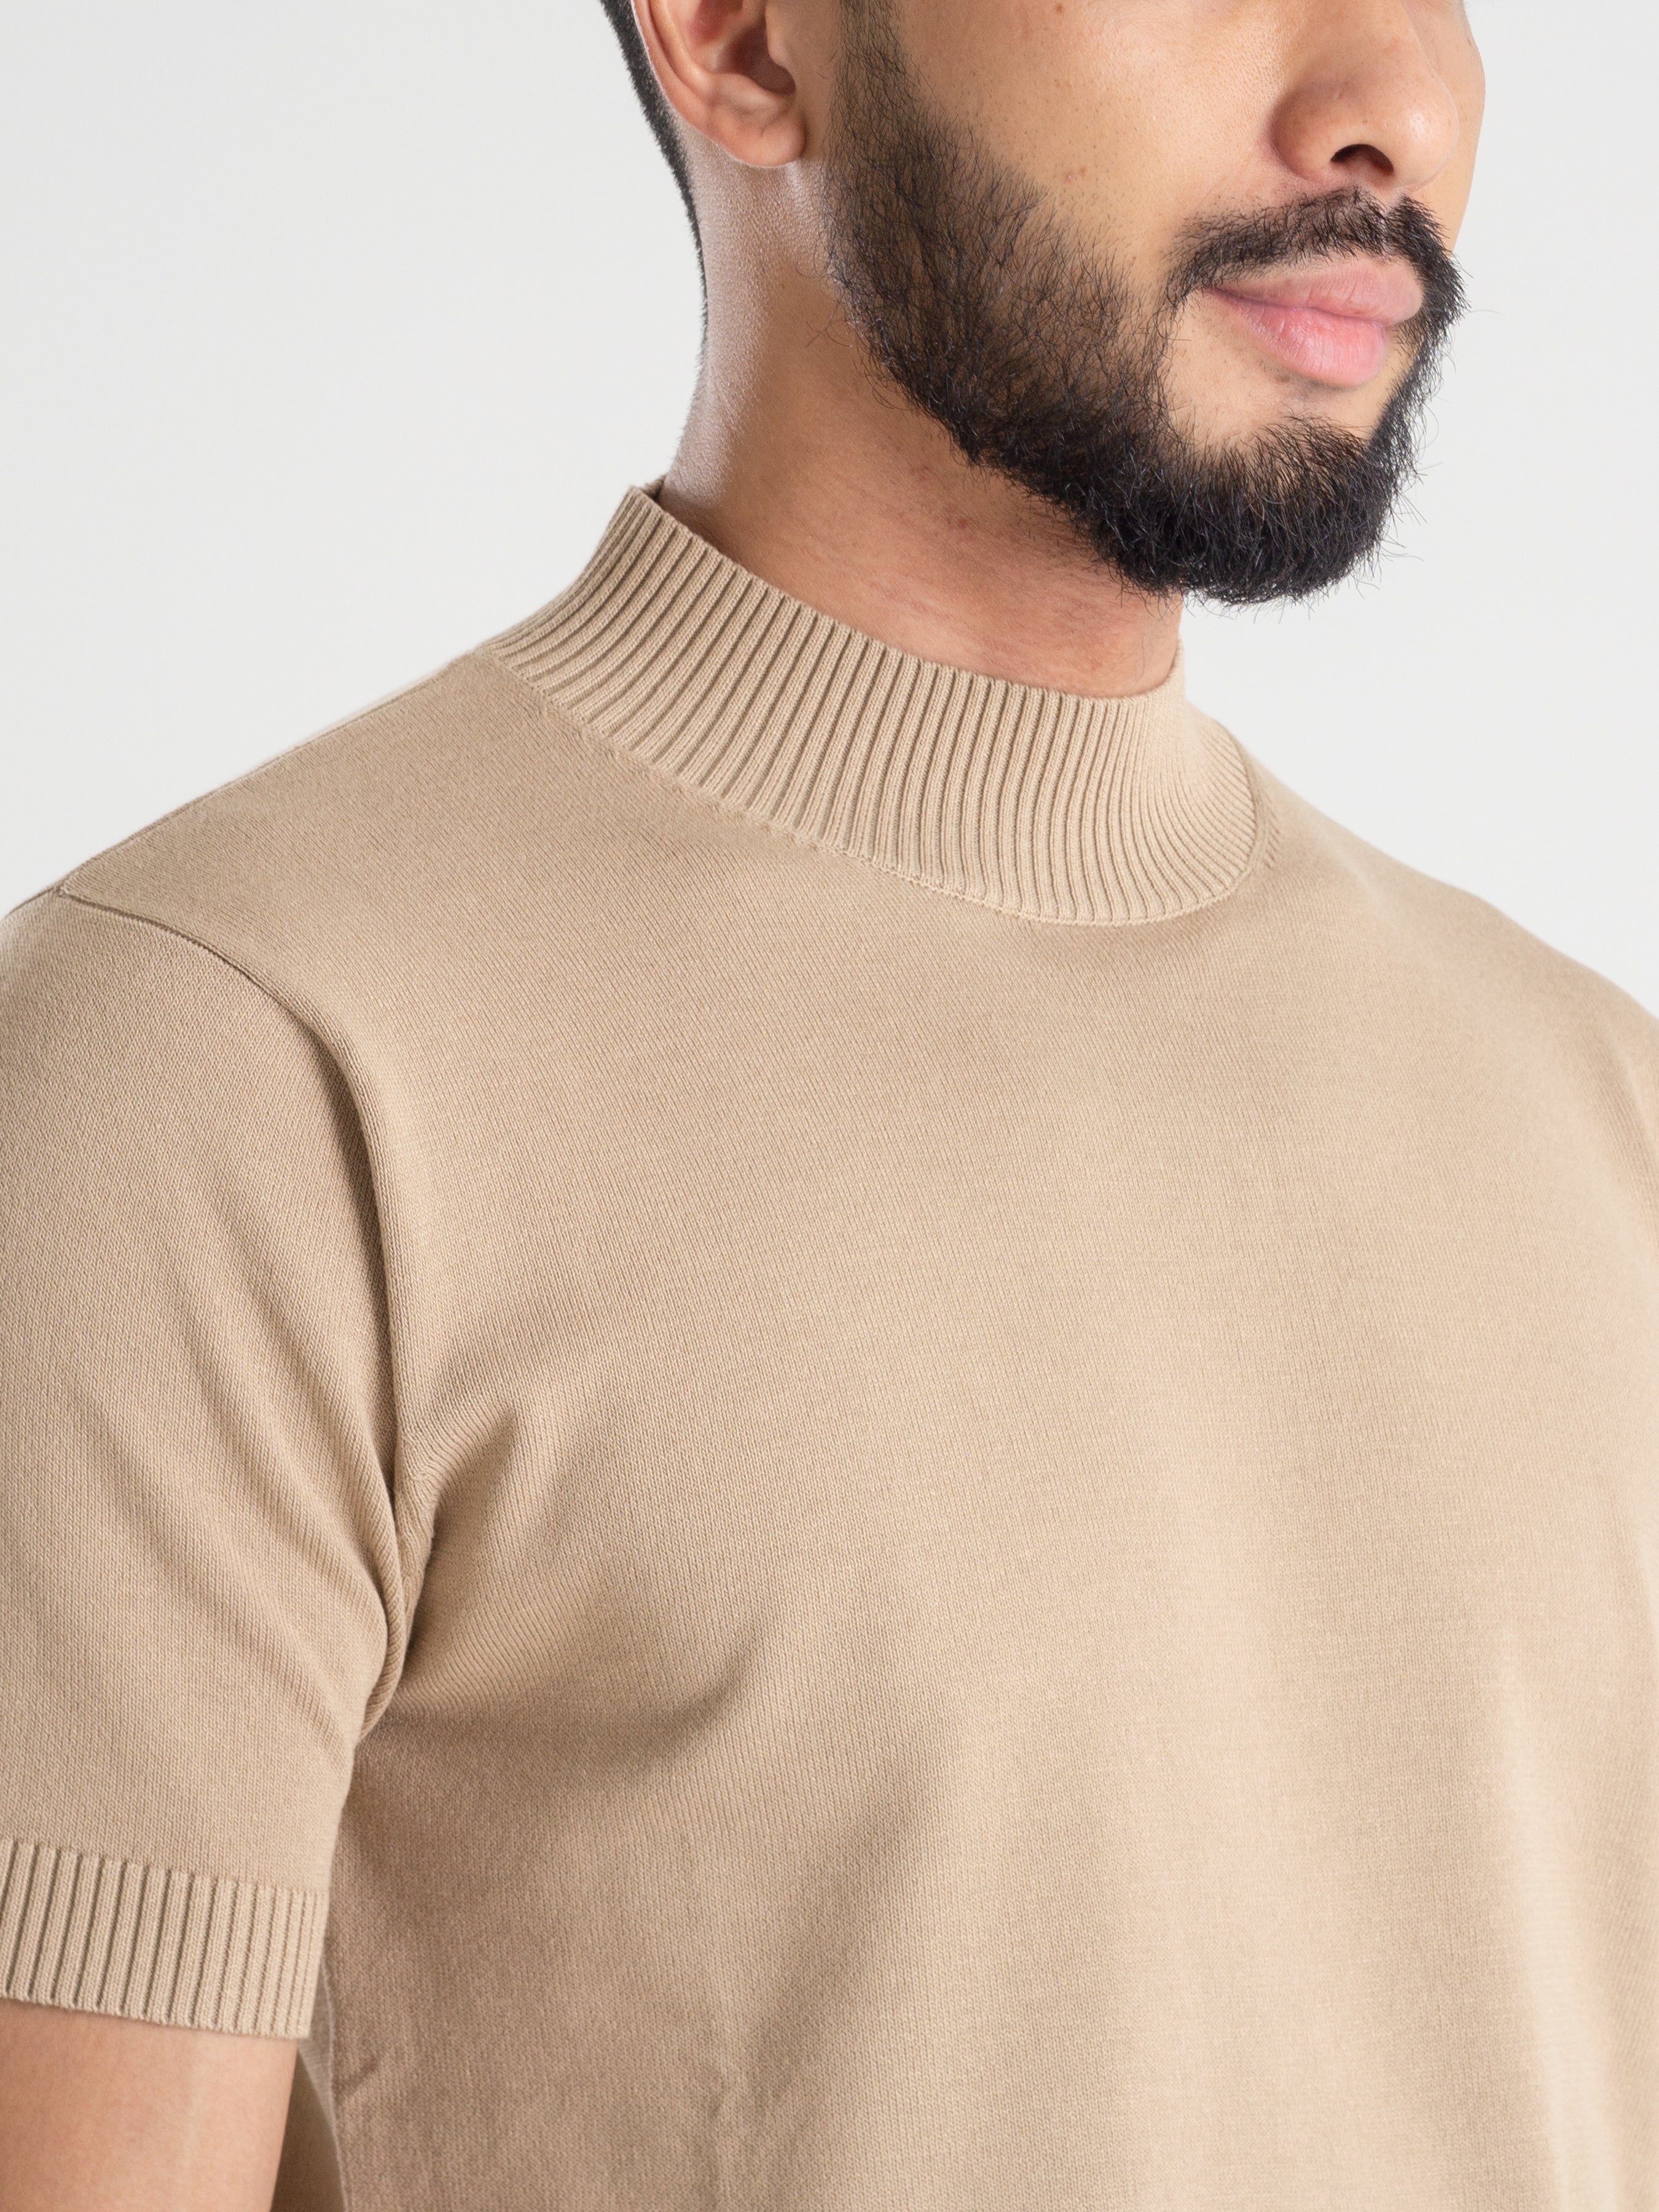 Knit Tee Ribbed Collar - Beige